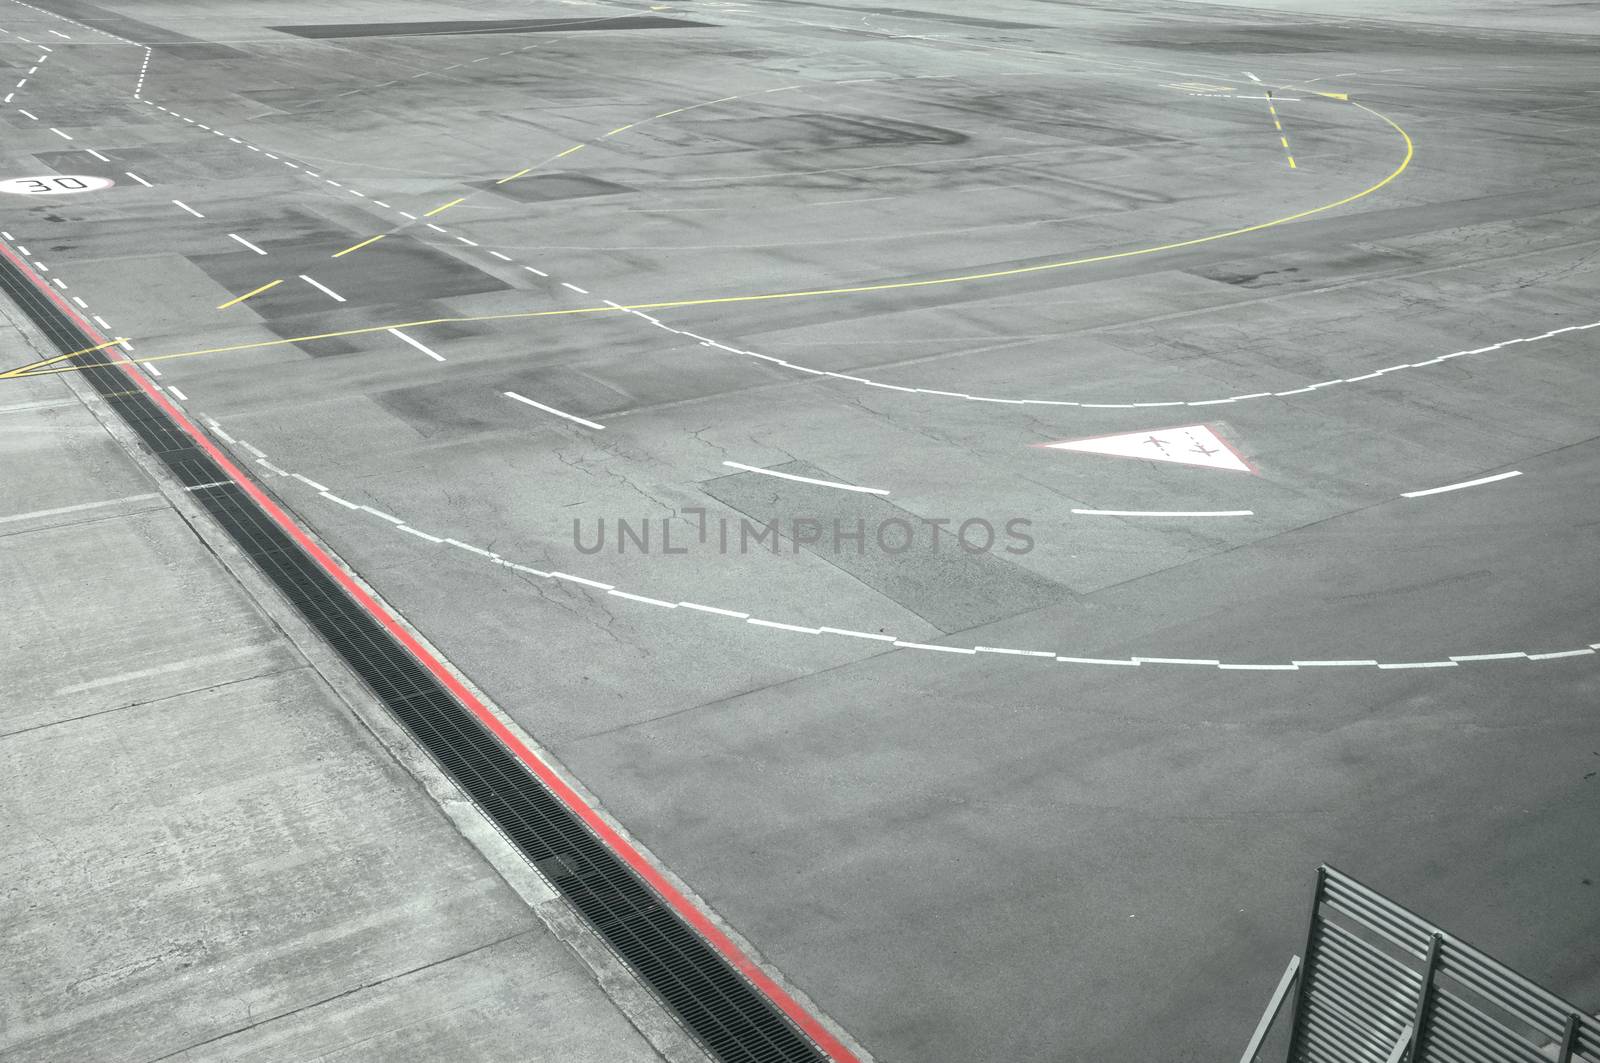 View of airport runway from window of airplane by Hepjam